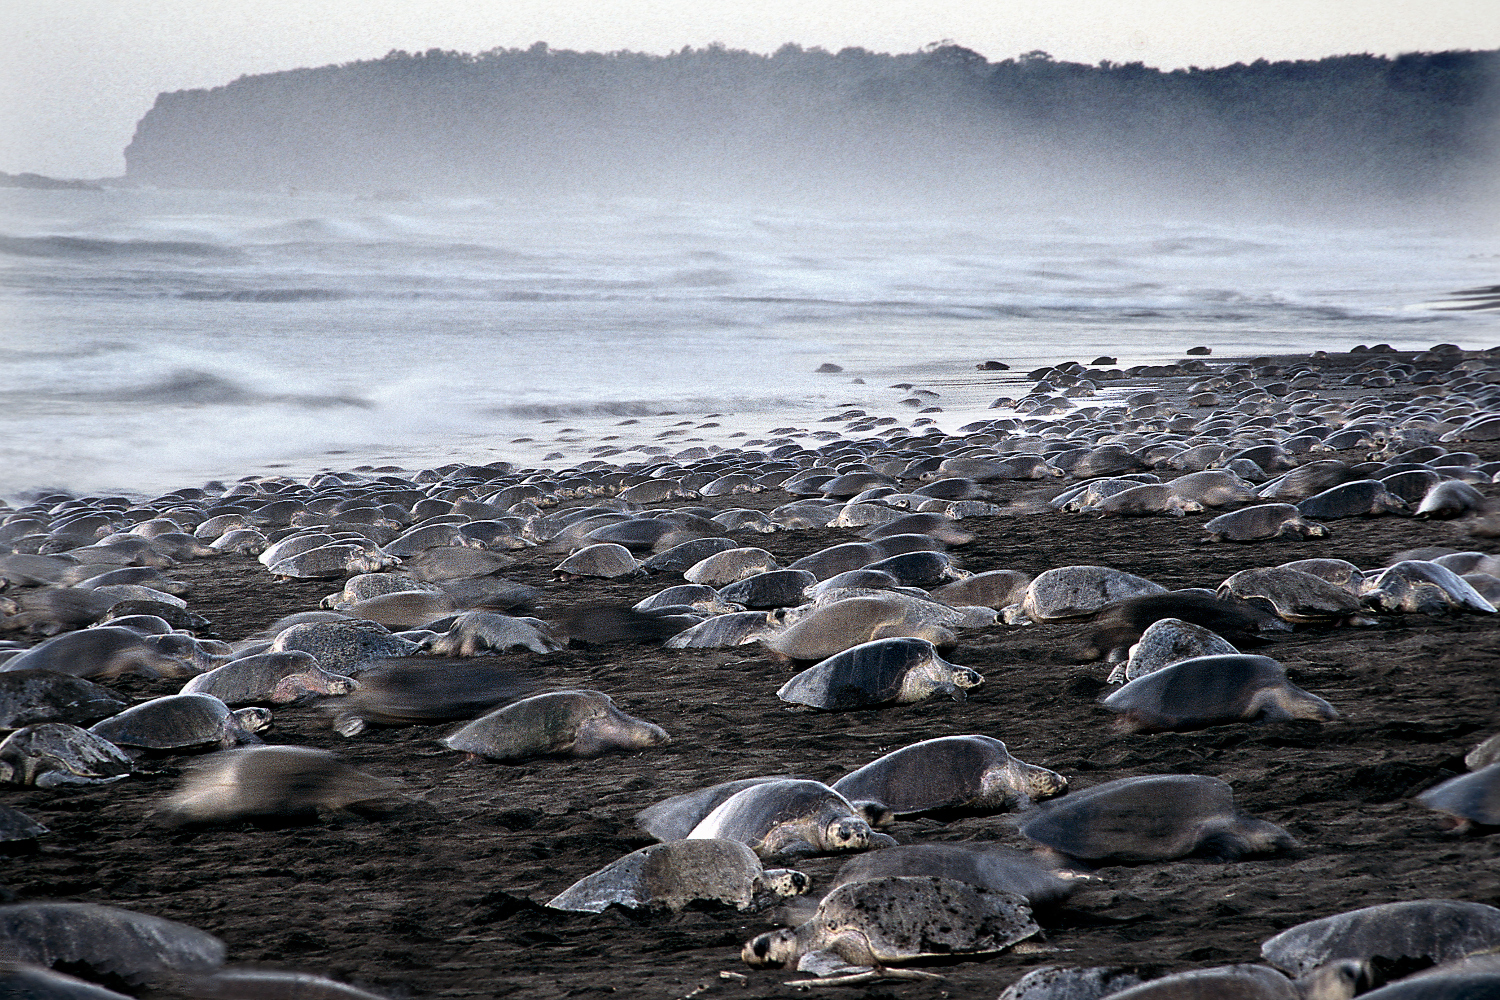 A turtle gathering on Playa Ostional is an experience you'll never forget. Image by Olivier Blaise / Moment Open / Getty